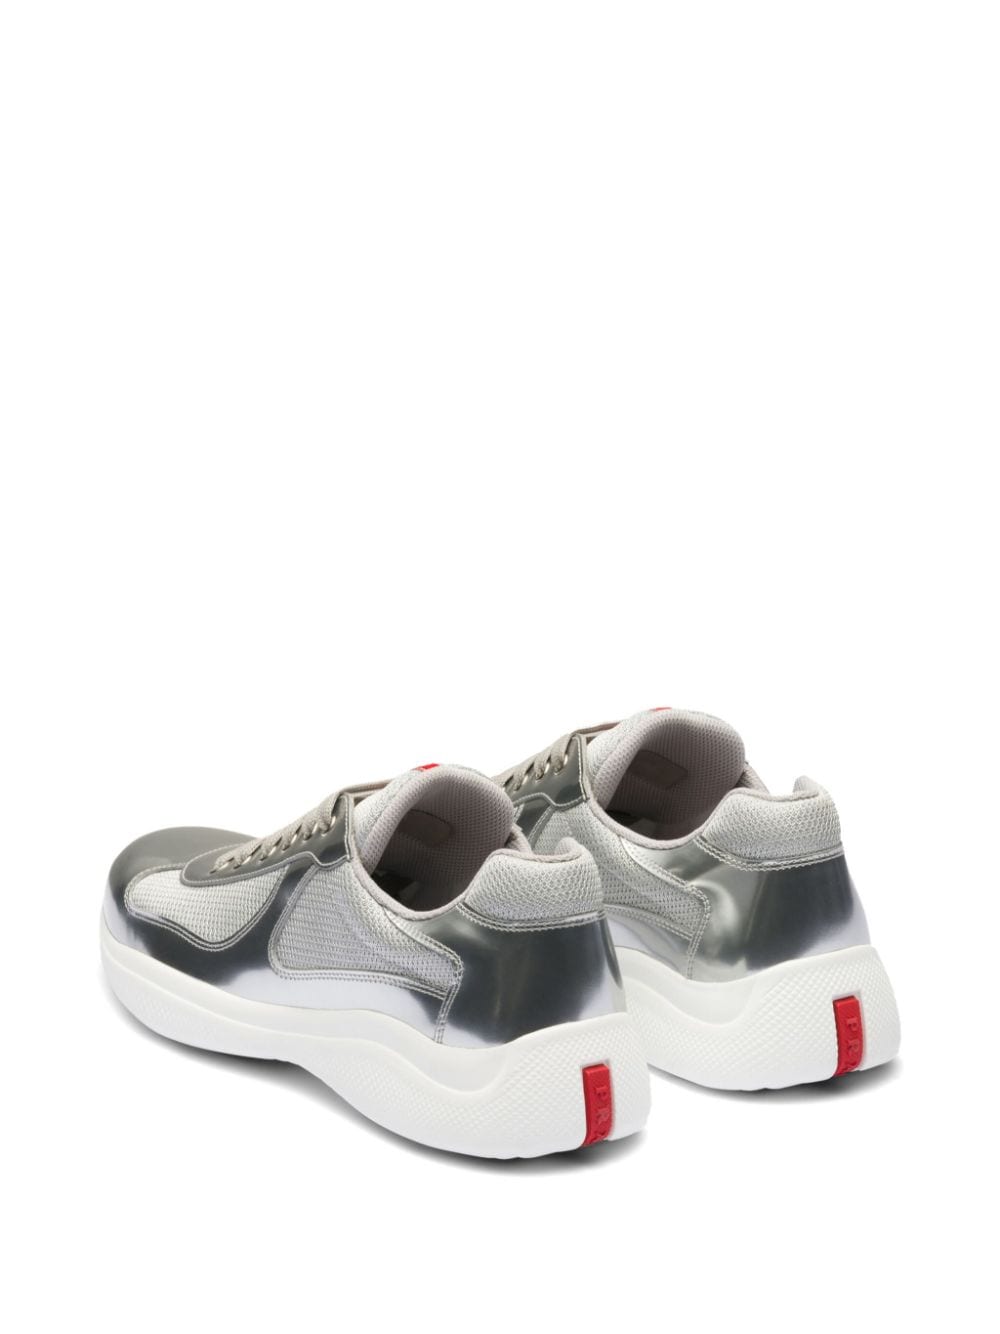 Prada America's Cup panelled sneakers Silver